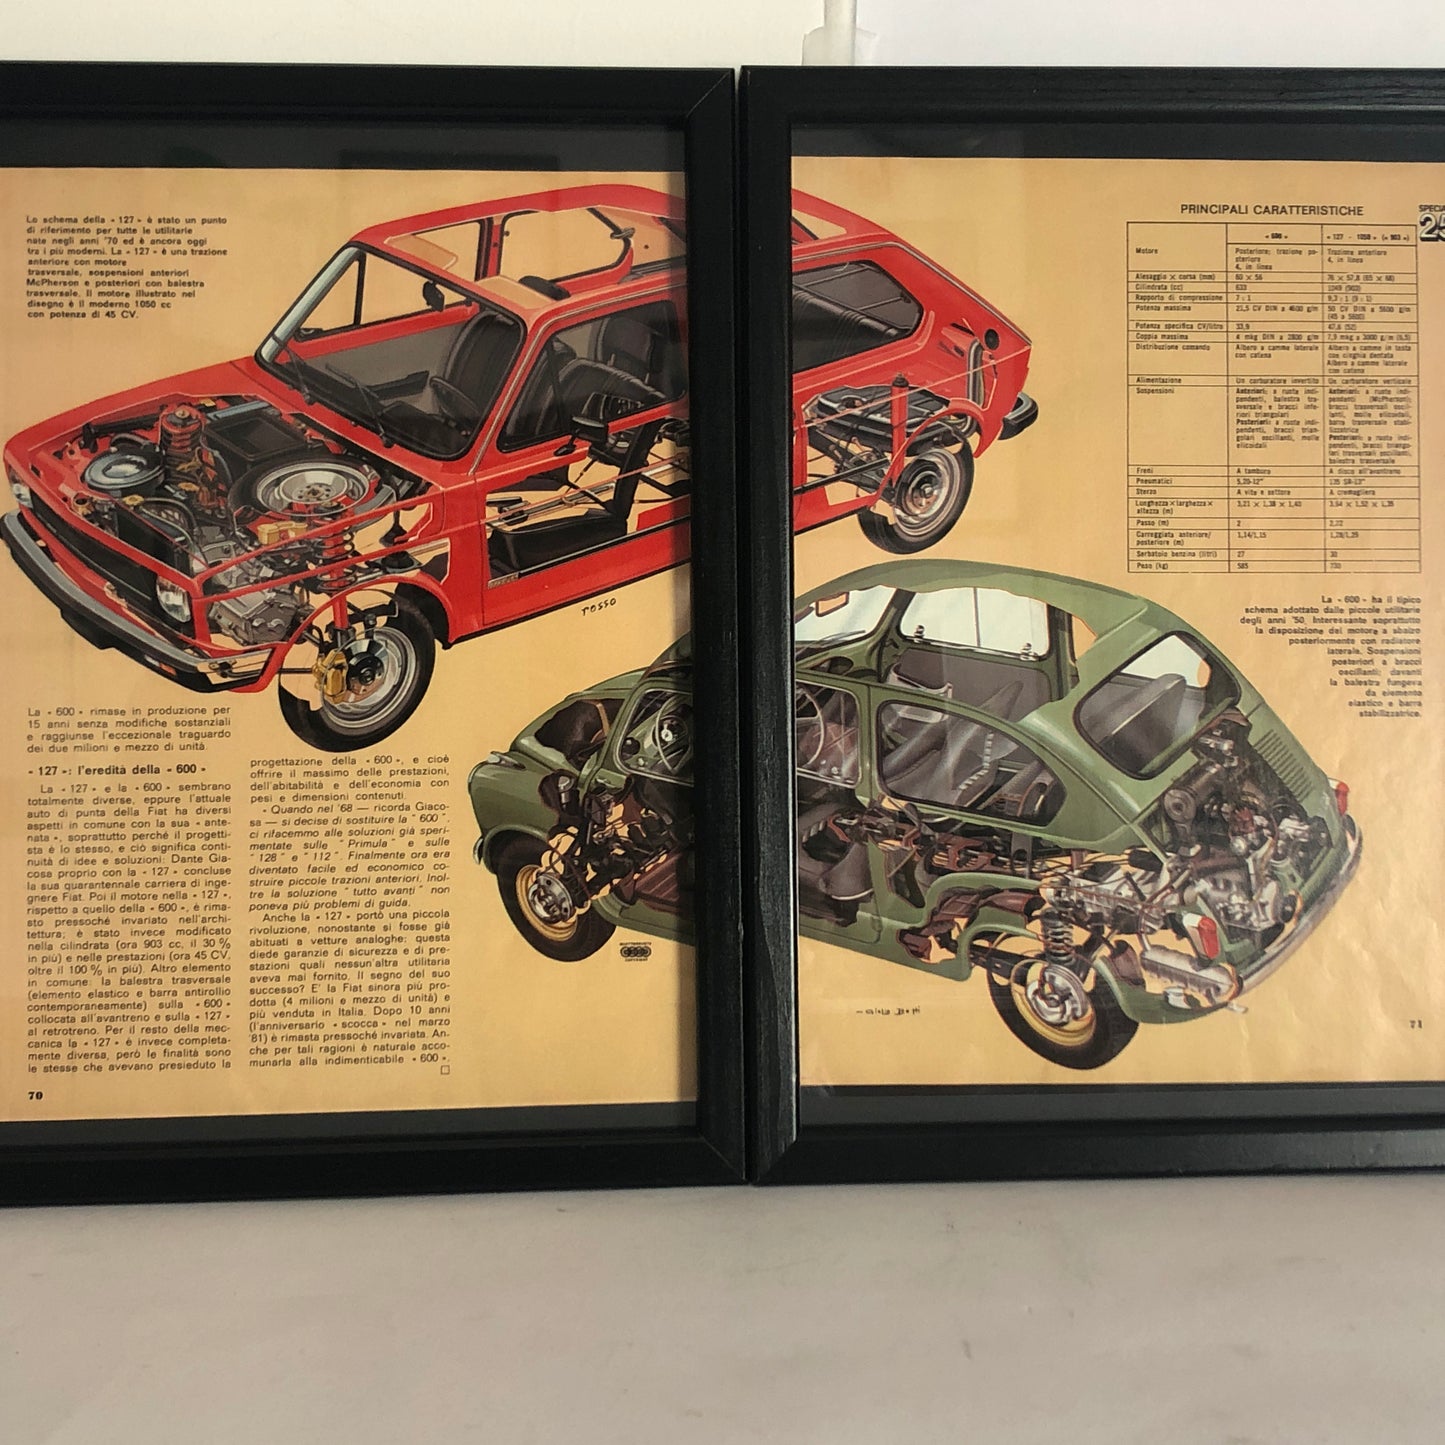 Fiat, Exploded View Fiat 600 and Fiat 127